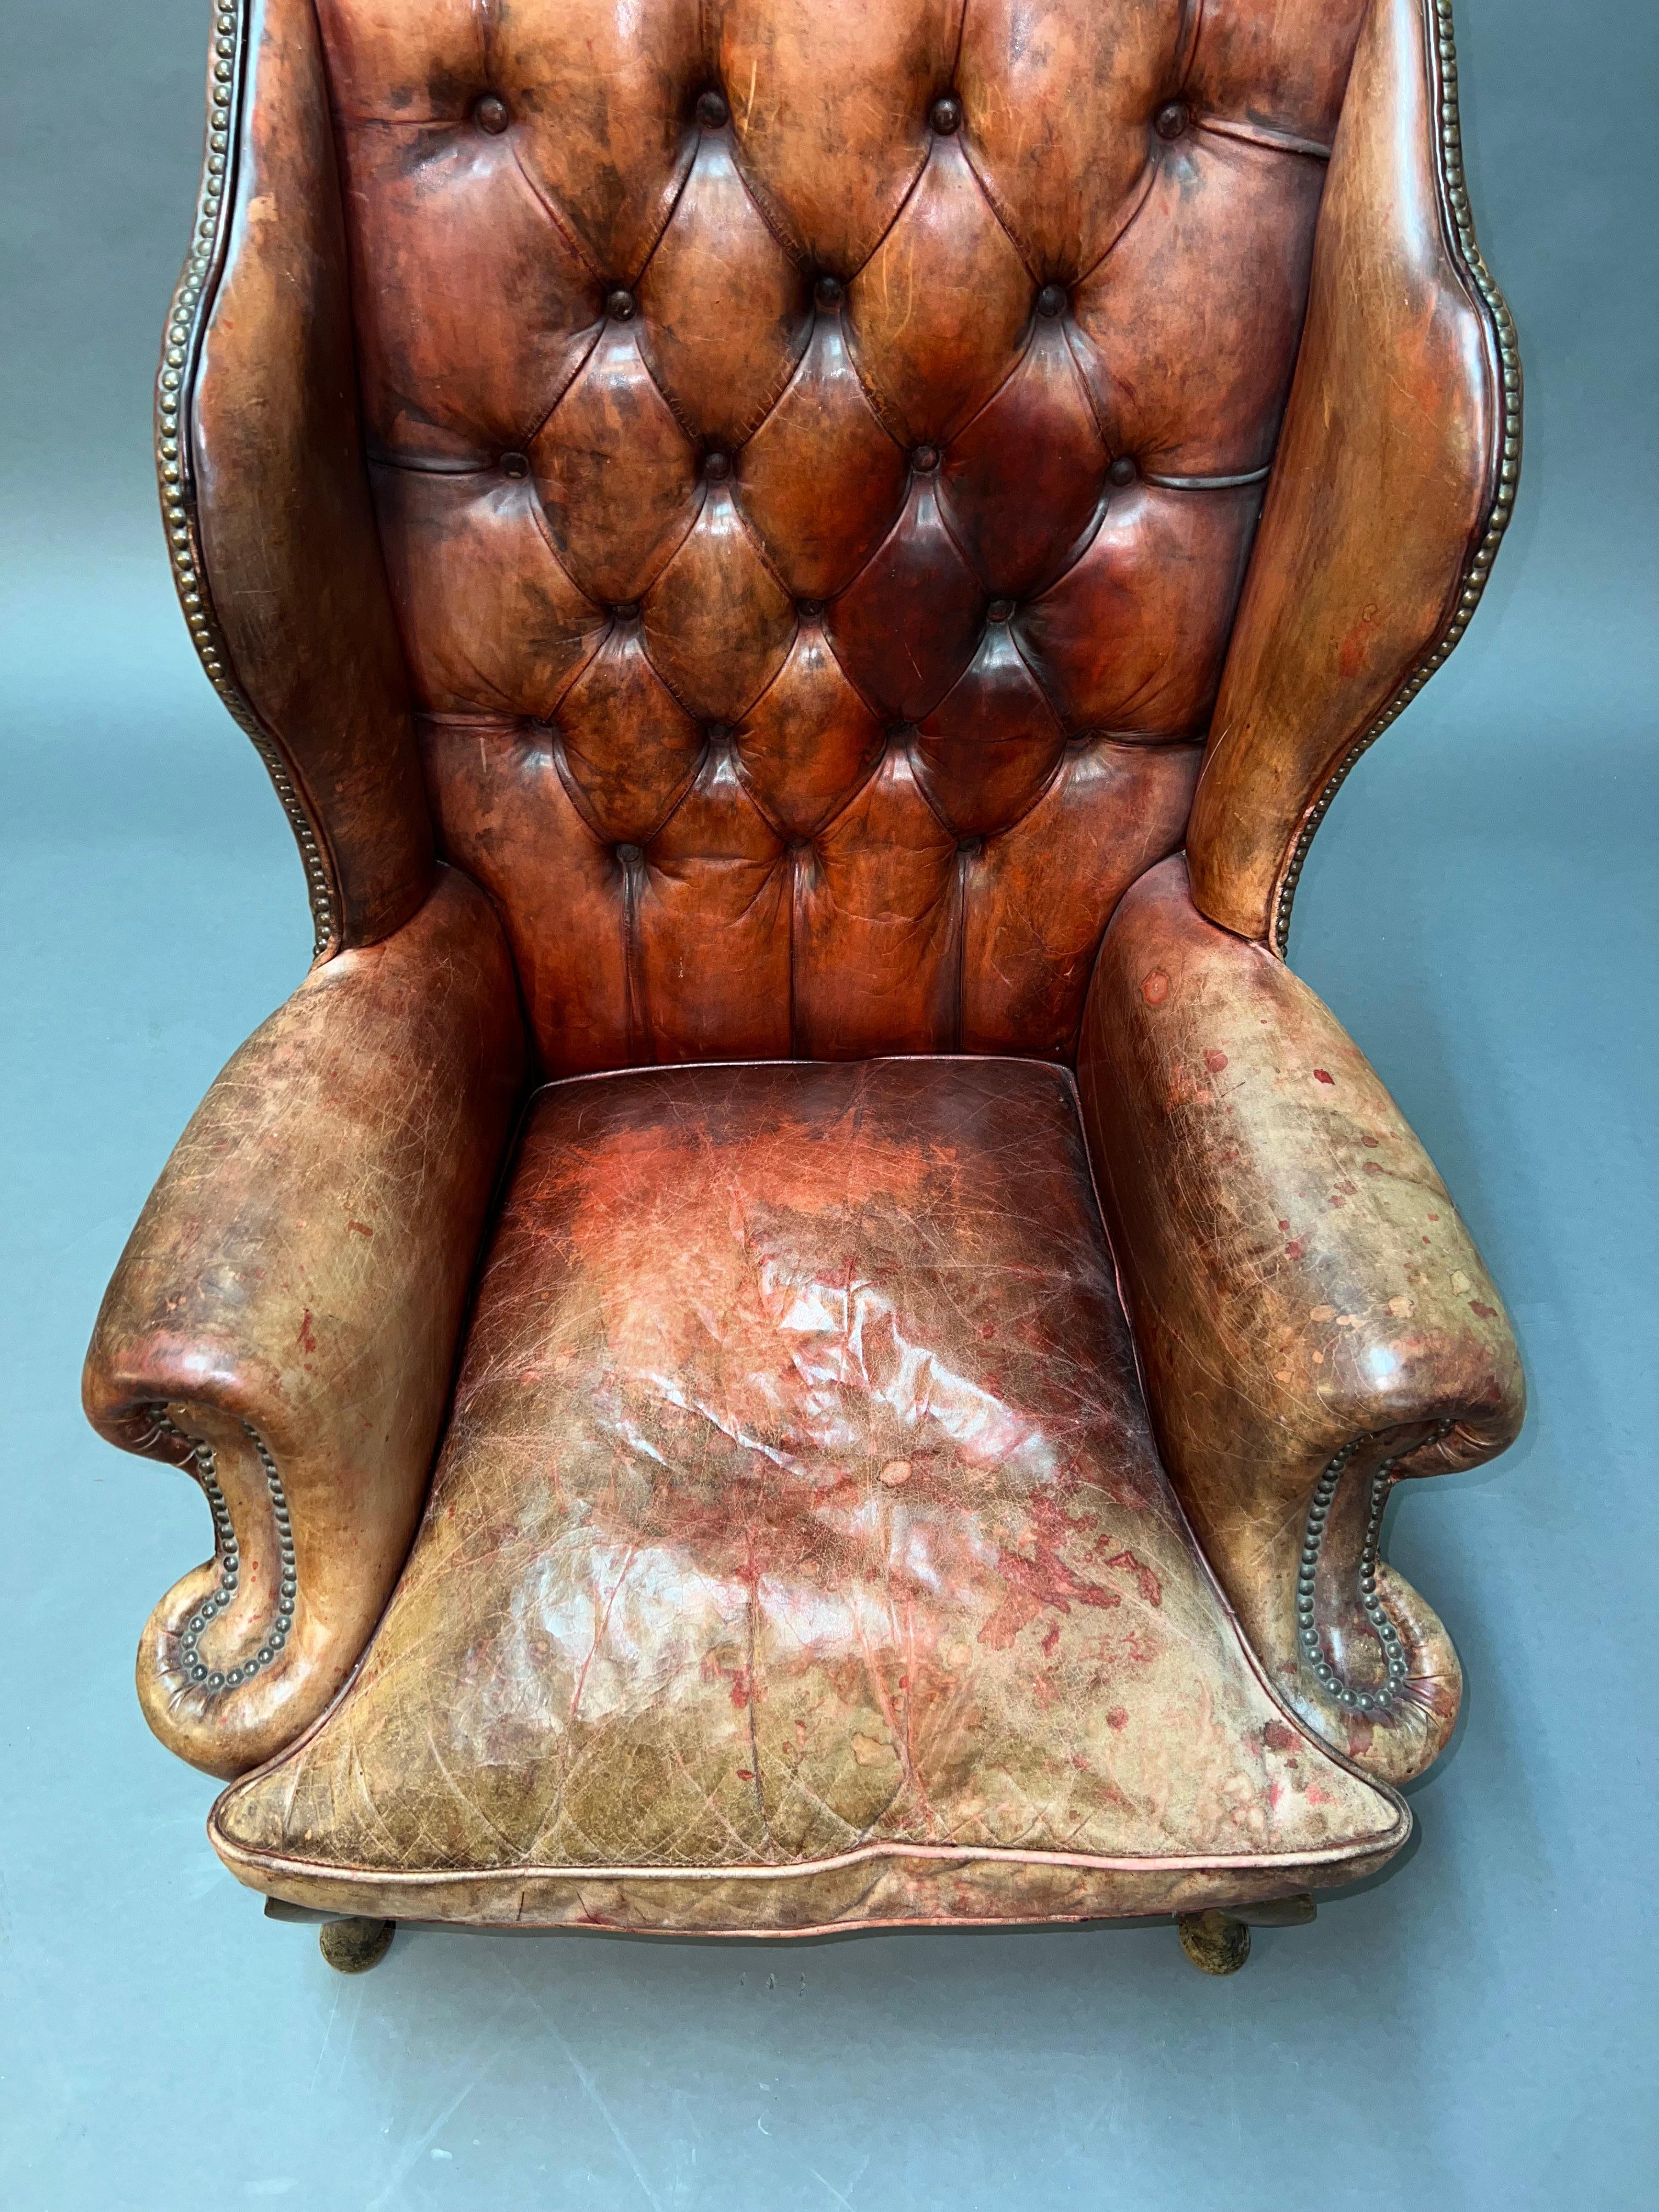 We are proud to have this stunning vintage Chesterfield brown leather choir chair for sale. This chair is a real tour de force, it has absolutely everything to offer, the leather skin is original and hand-dyed, the rivet work is all antiquated and